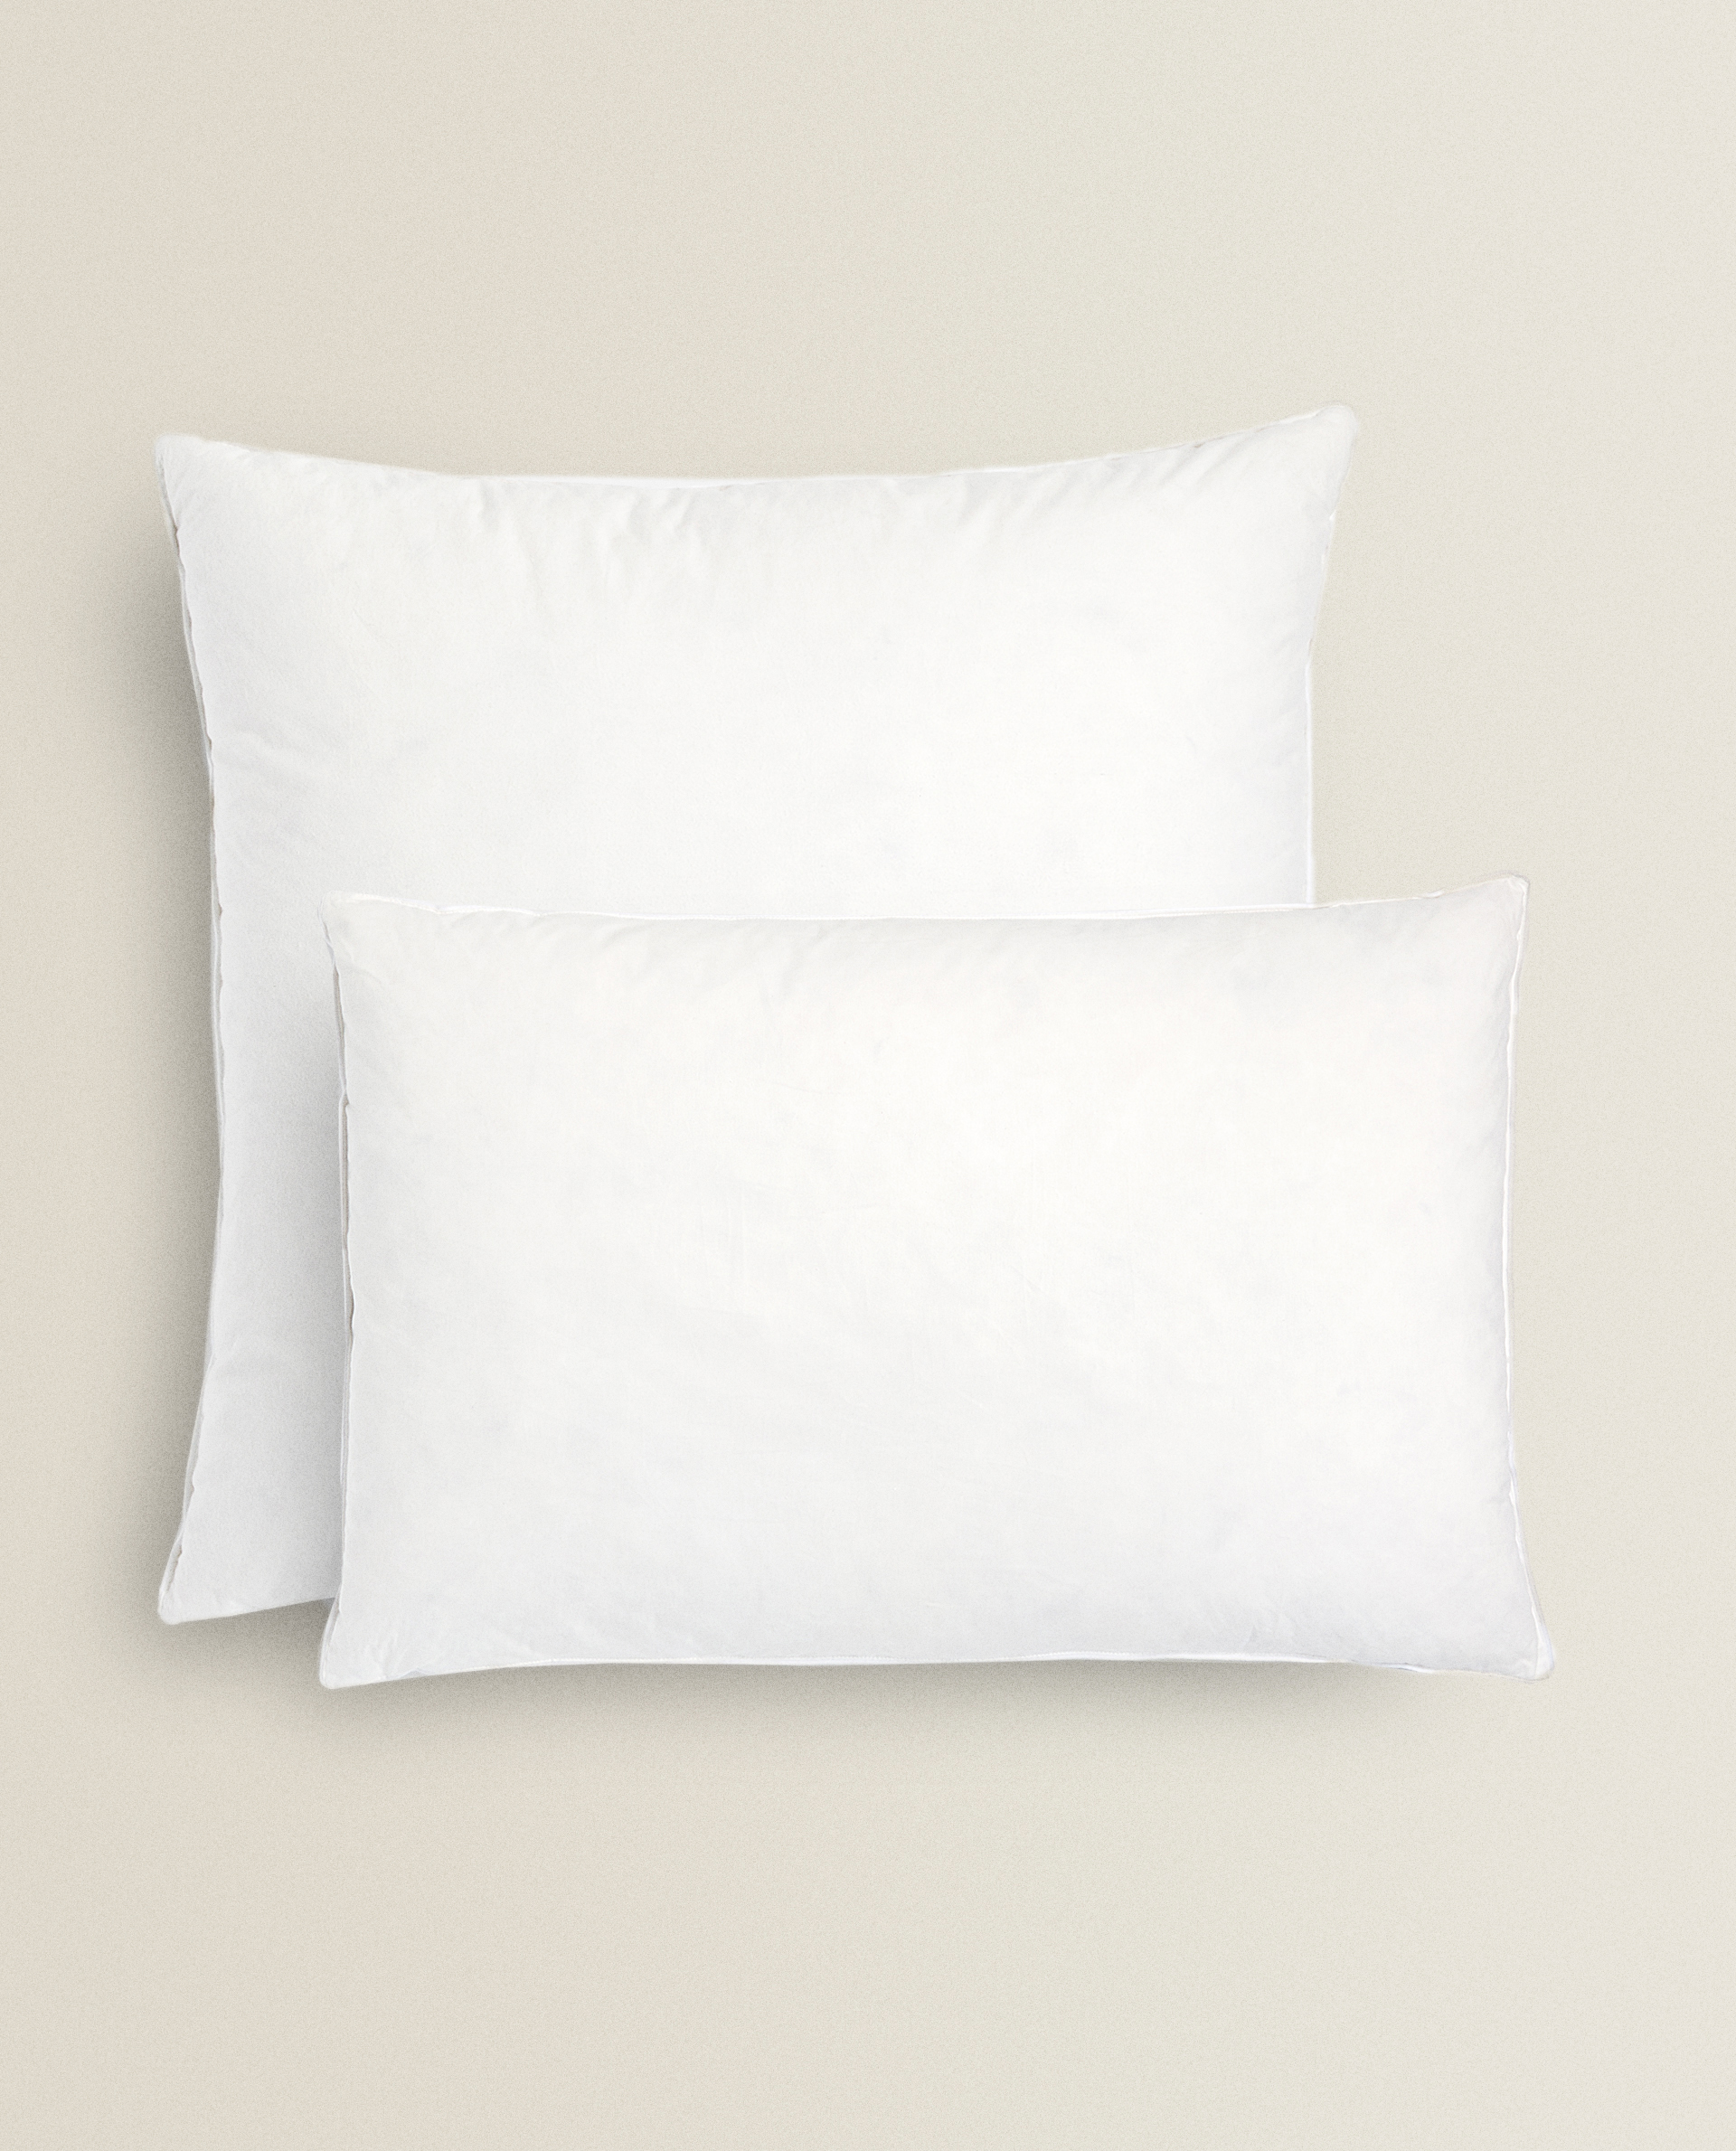 all feather pillow